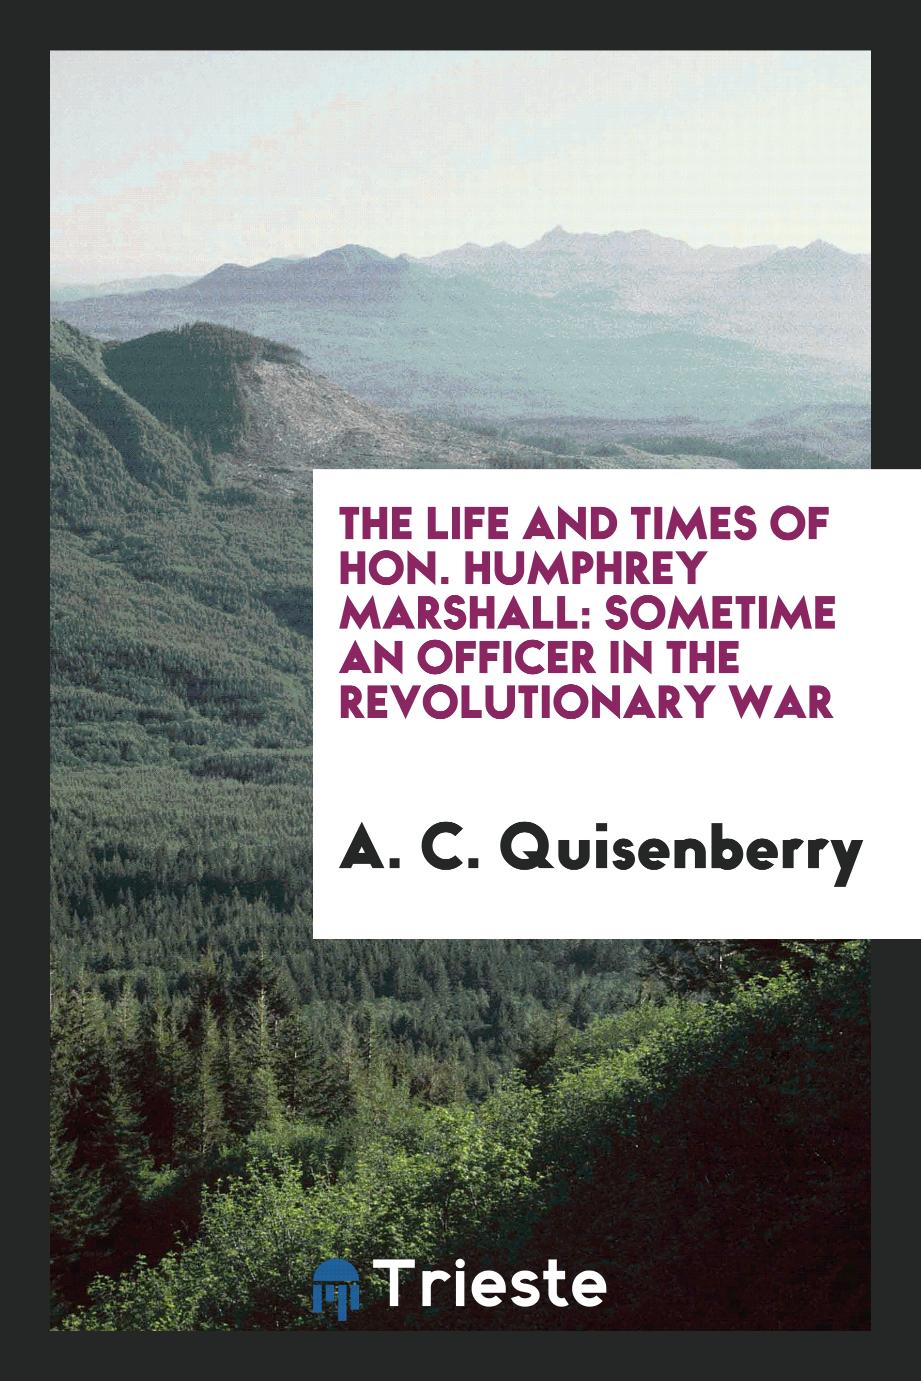 The Life and Times of Hon. Humphrey Marshall: Sometime an Officer in the Revolutionary War